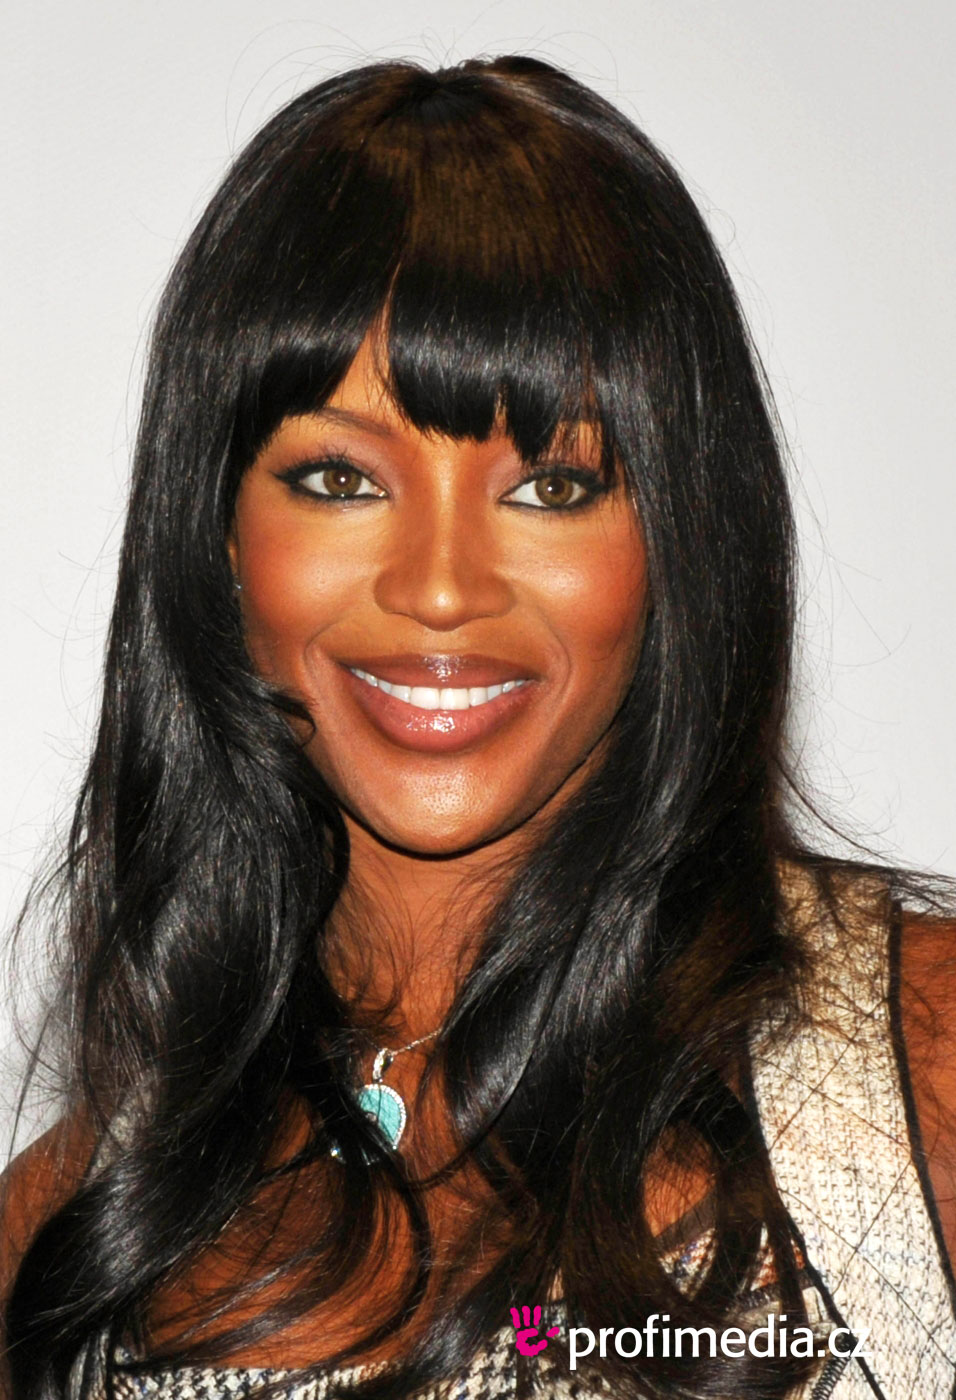 prom hairstyle - naomi campbell - naomi campbell